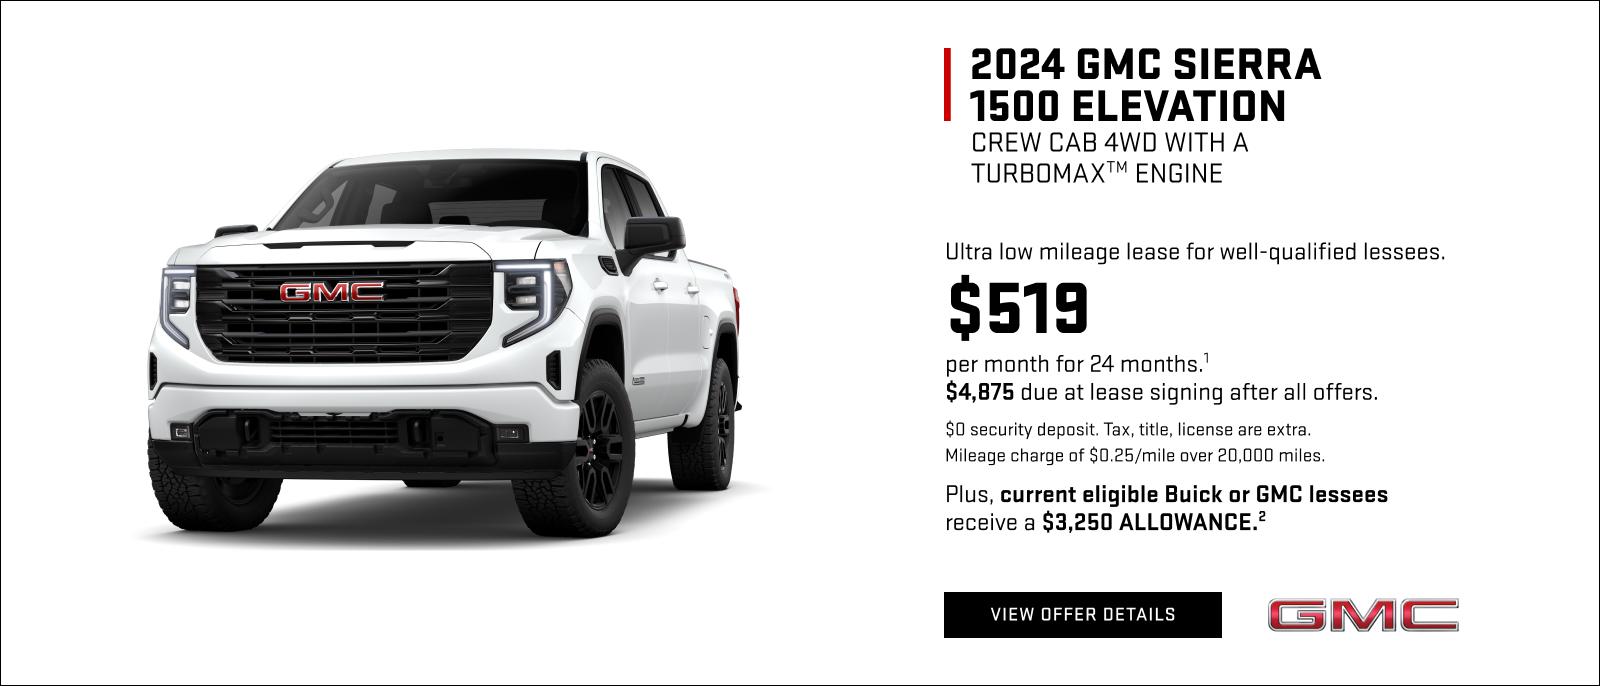 1. Payments are for a 2024 Sierra 1500 Elevation Crew Cab 4WD with a 2.7L TurbomaxTM Engine with an MSRP of $57,195. 24 monthly payments total $12,456. Closed-end lease. Option to purchase at lease end for an amount to be determined at lease signing. GM Financial must approve lease. Take new retail delivery by 4/30/24. Mileage charge of $.25/mile over 20,000 miles. Late payment and early termination fees apply. Lessee is responsible for insuring the lease vehicle. Lessee pays for maintenance, repair, excess wear and a disposition fee of $495 or less at end of lease. Not available with some other offers. 
2. MUST BE A CURRENT LESSEE OF A 2019 MODEL YEAR OR NEWER BUICK OR GMC VEHICLE THROUGH GM FINANCIAL FOR AT LEAST 30 DAYS PRIOR TO THE NEW VEHICLE SALE. Not available with some other offers. Take new retail delivery by 4/30/24.